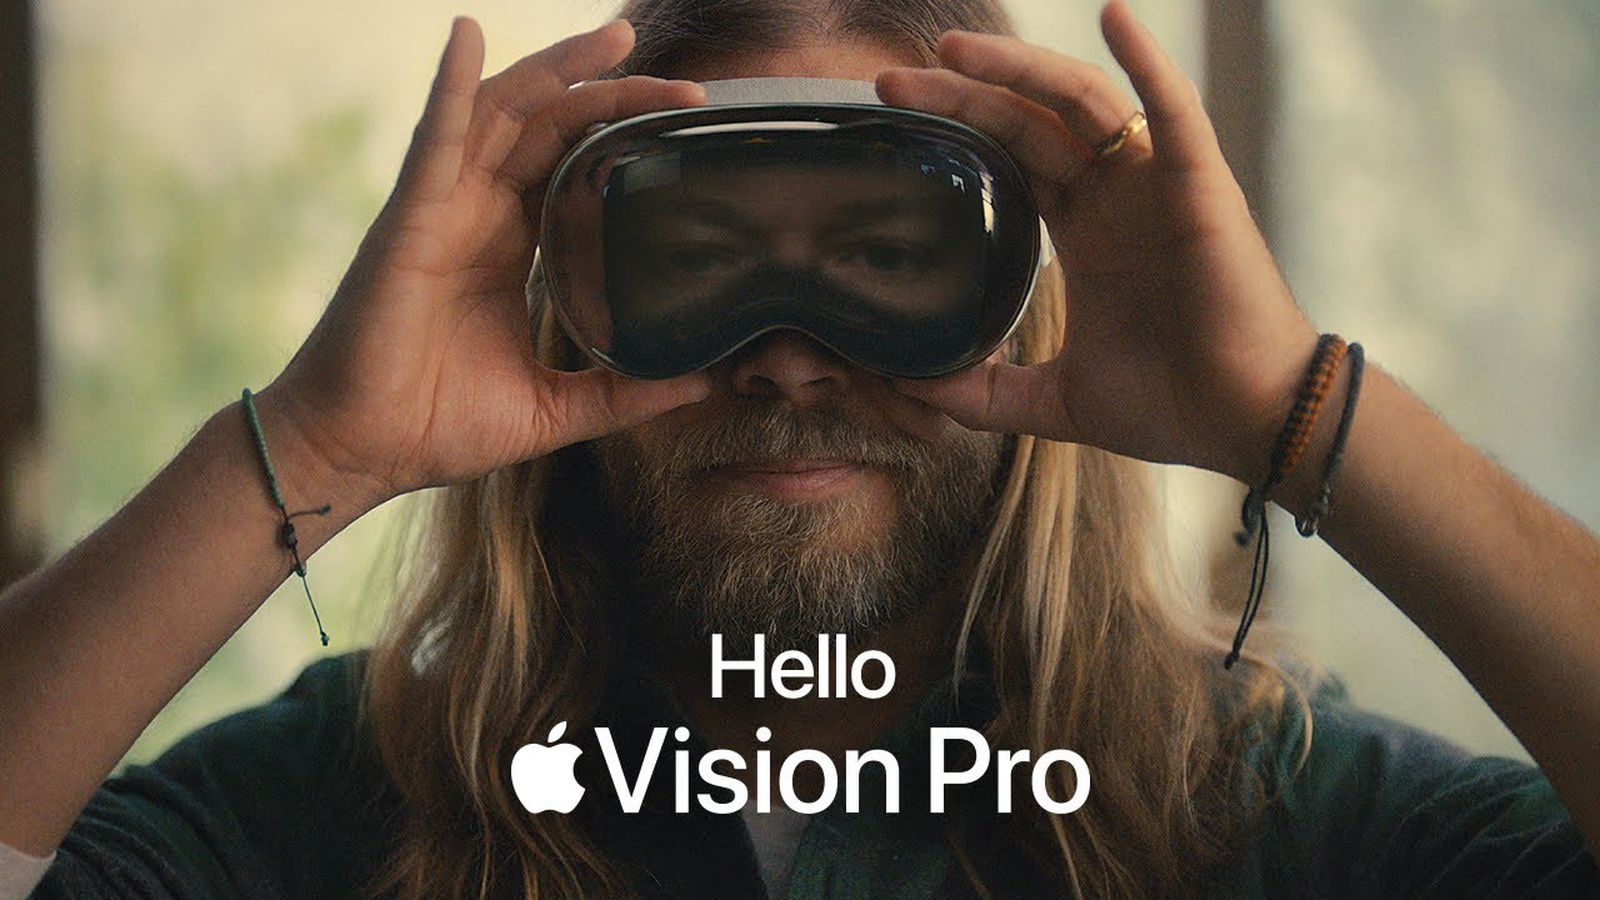 Apple says “hello” to the Vision Pro in a new ad as the headset’s launch approaches